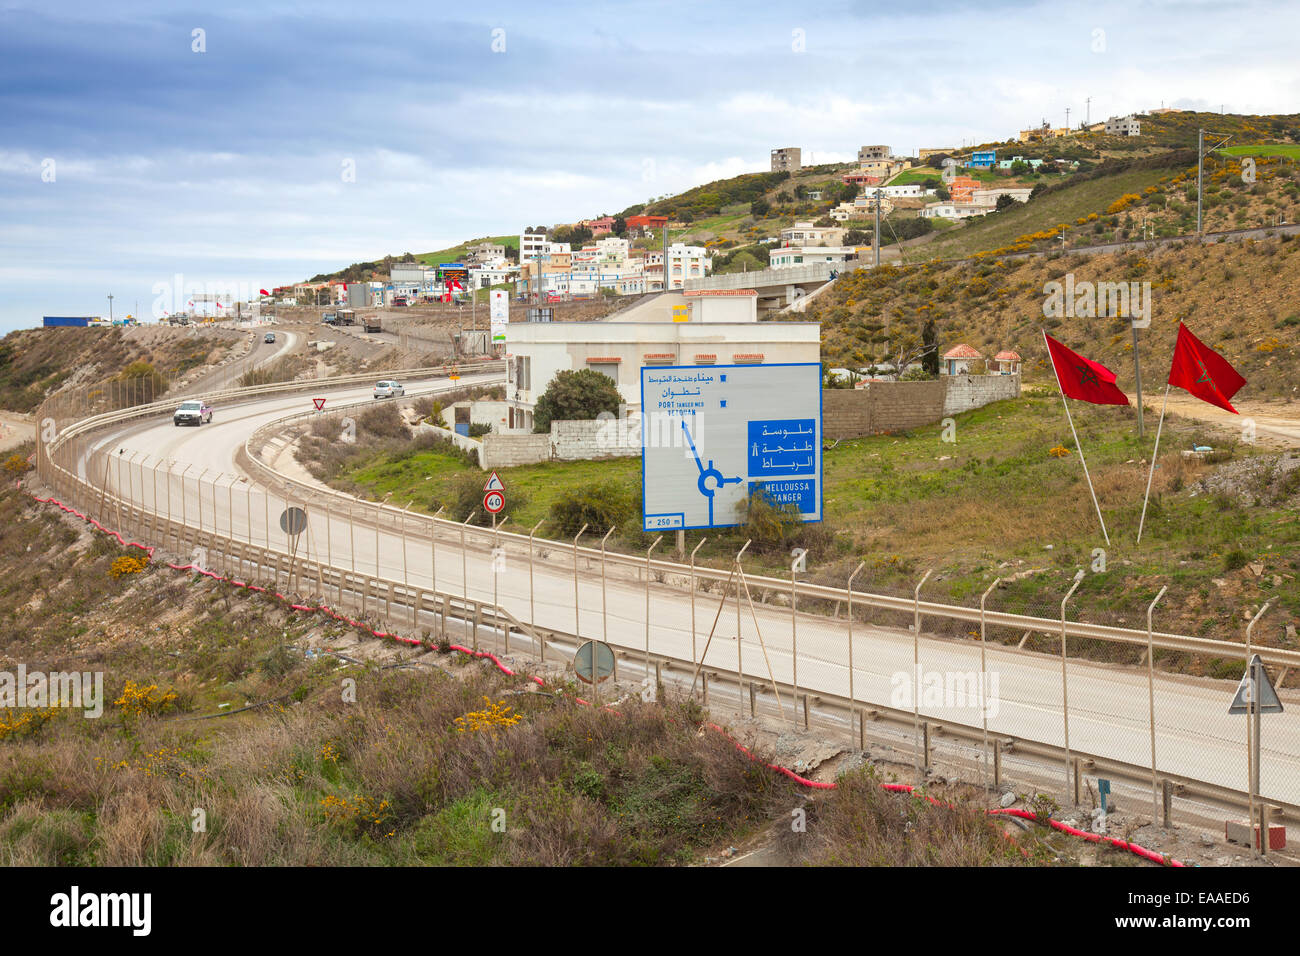 Tangier, Morocco - March 28, 2014: Coastal road from Tangier city to the Tanger-Med 2 new port terminals under construction Stock Photo